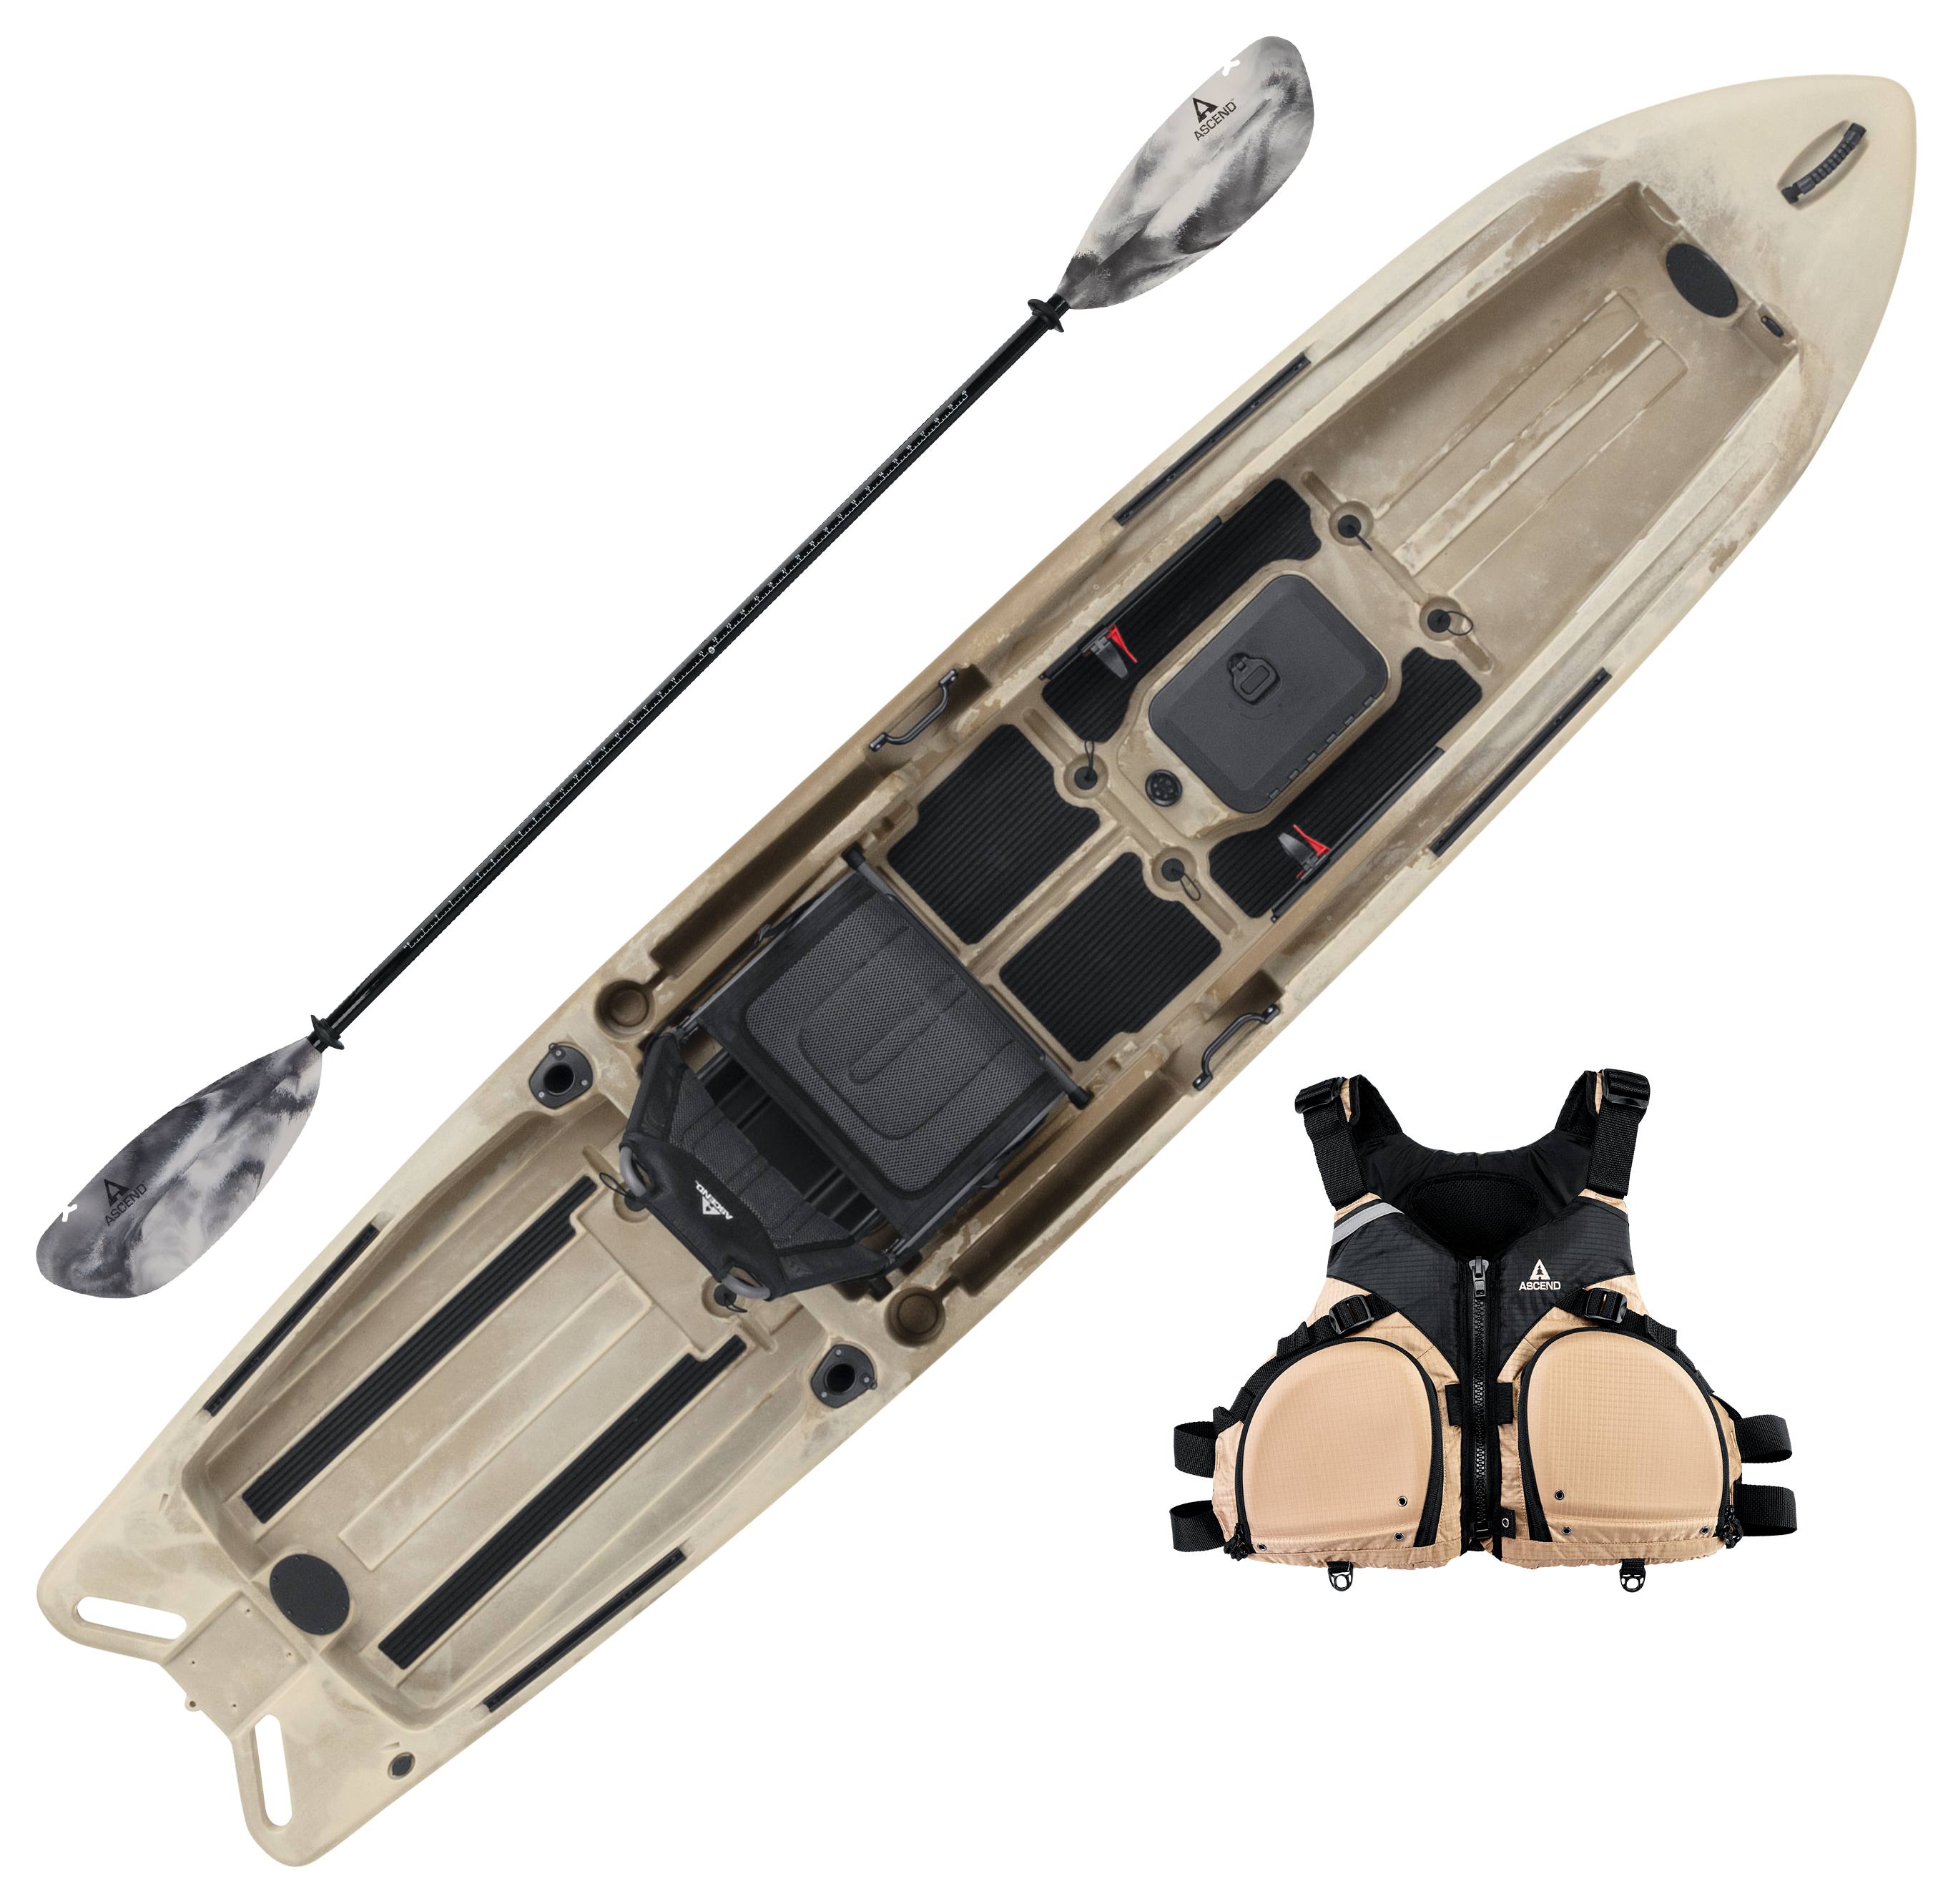 Ascend 128X Desert Storm Sit-on-Top Kayak with Yak-Power Fishing Package